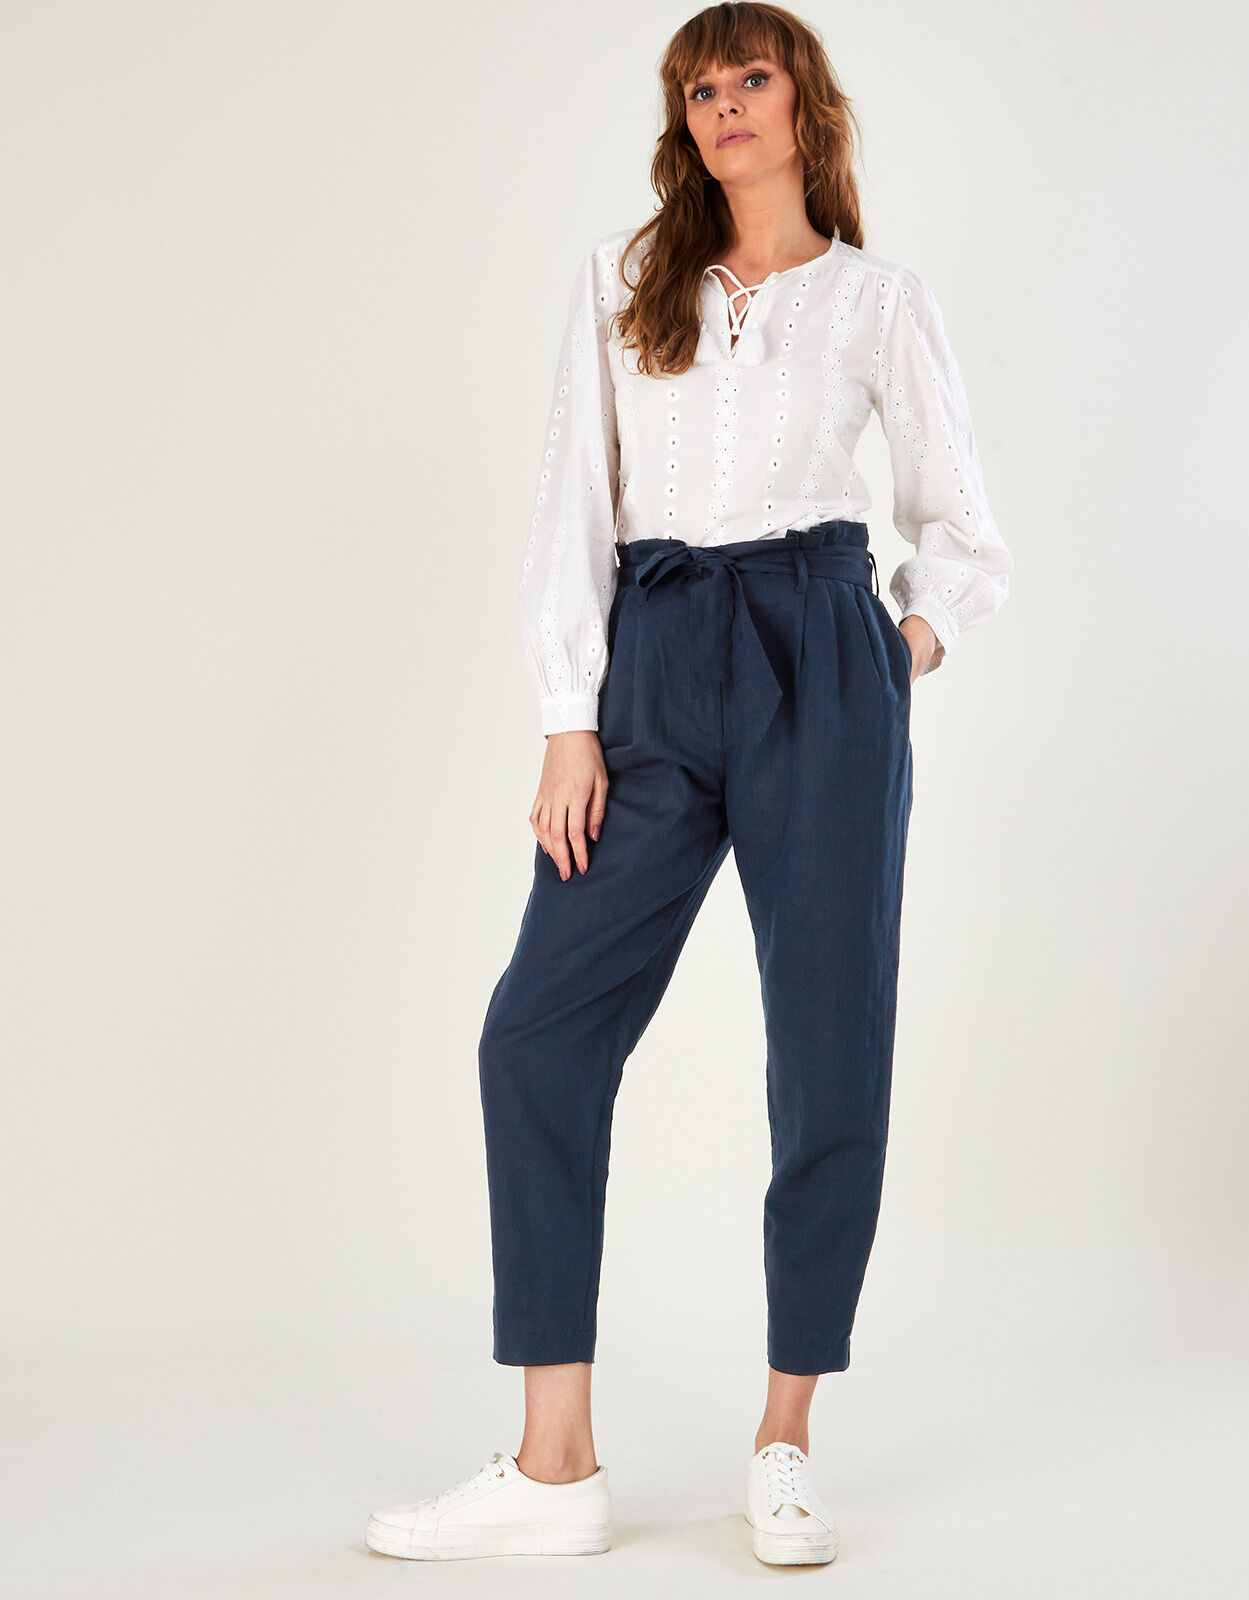 Paperbag Trousers by LASCANA | Look Again